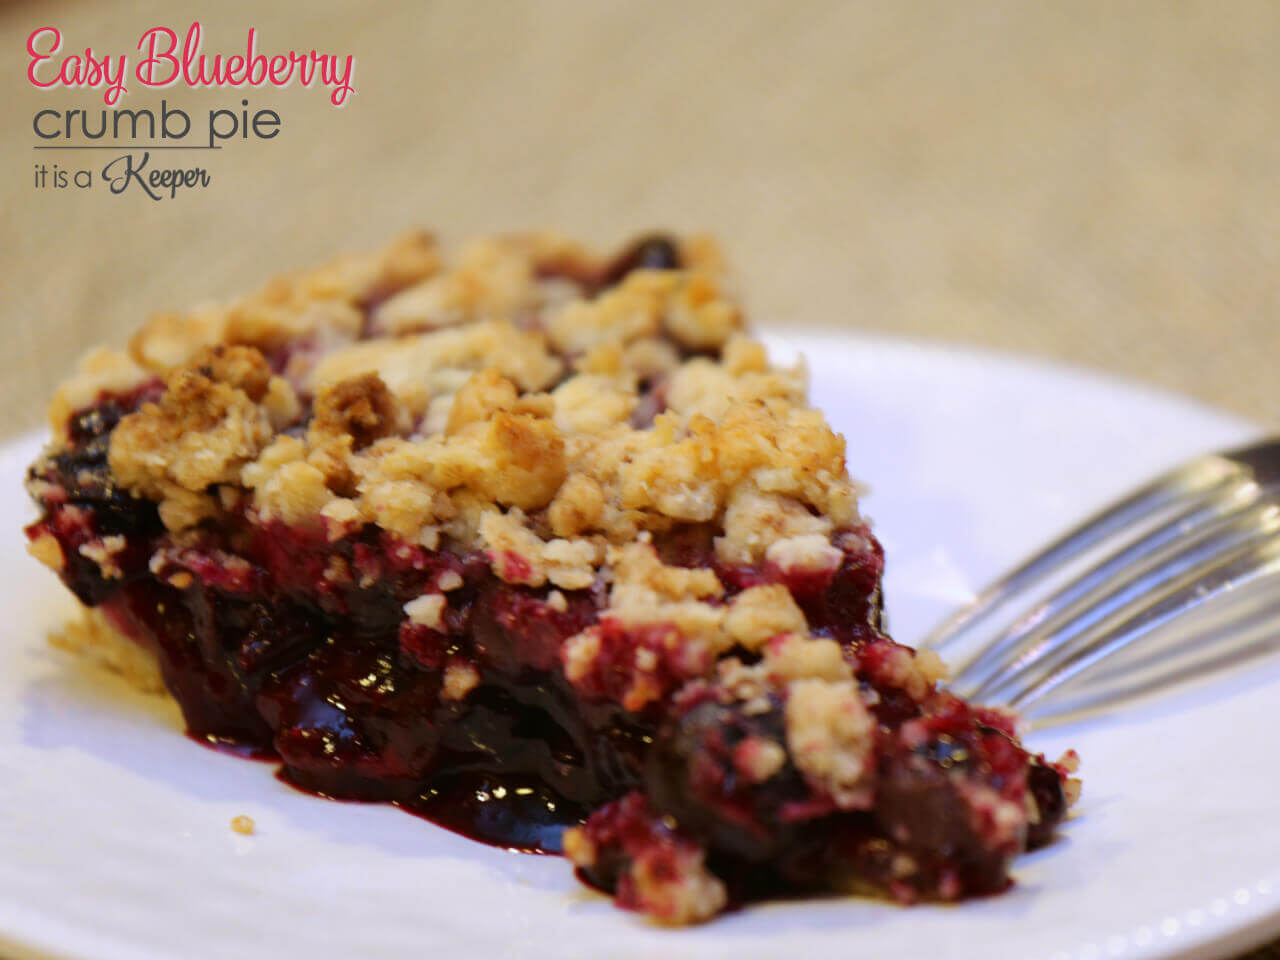 Easy-Blueberry-Crumb-Pie-this-easy-pie-recipe-doesnt-use-a-traditional-pastry-crust-and-is-super-easy-to-make-C2.jpg